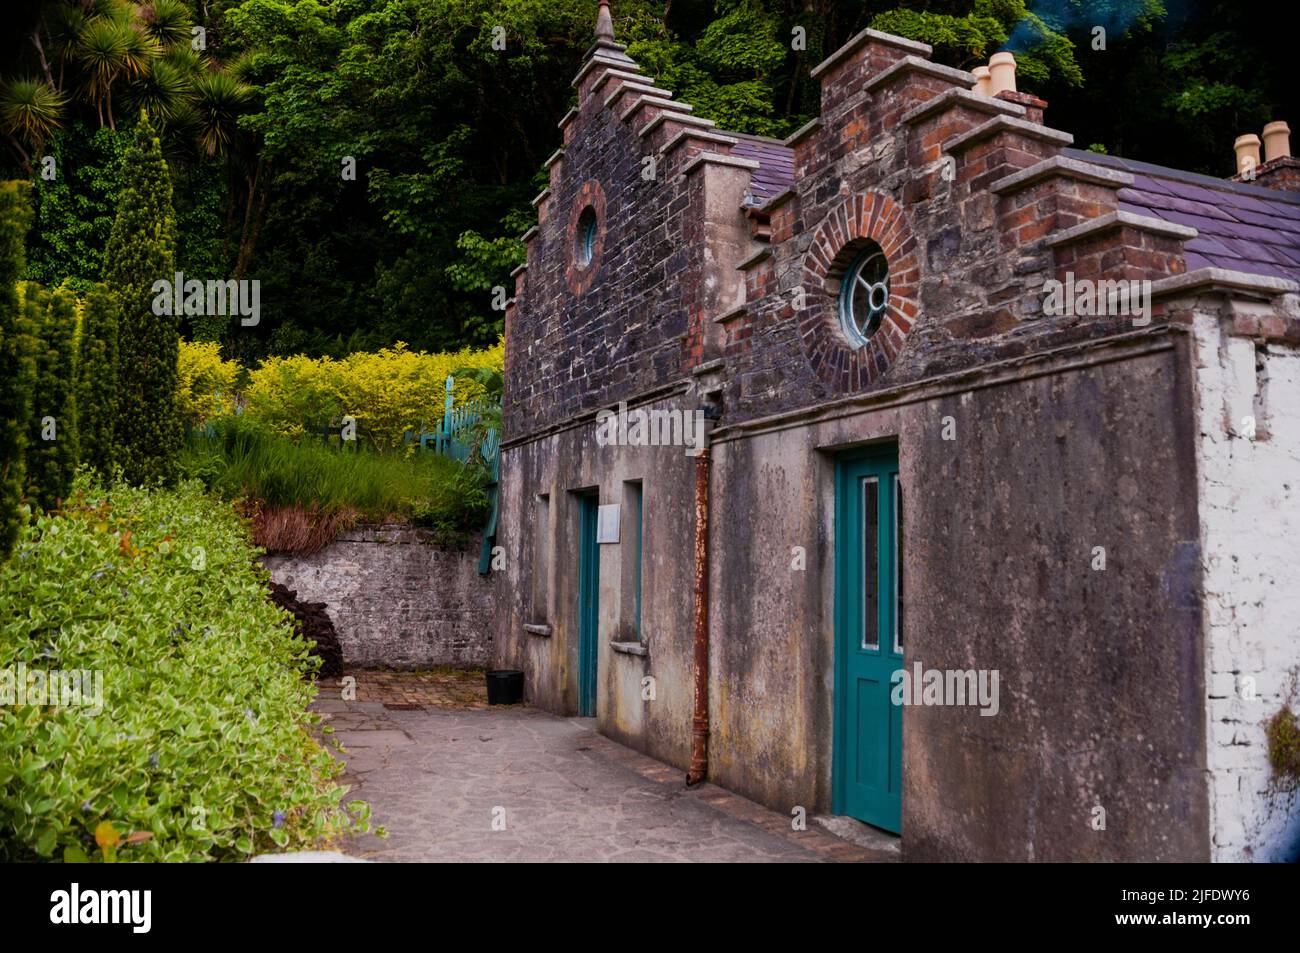 Corbie or crow stepped gable and oculus windows of the Garden Bothy at Kylemore Abbey and Victorian Gardens in Connemara, Ireland. Stock Photo